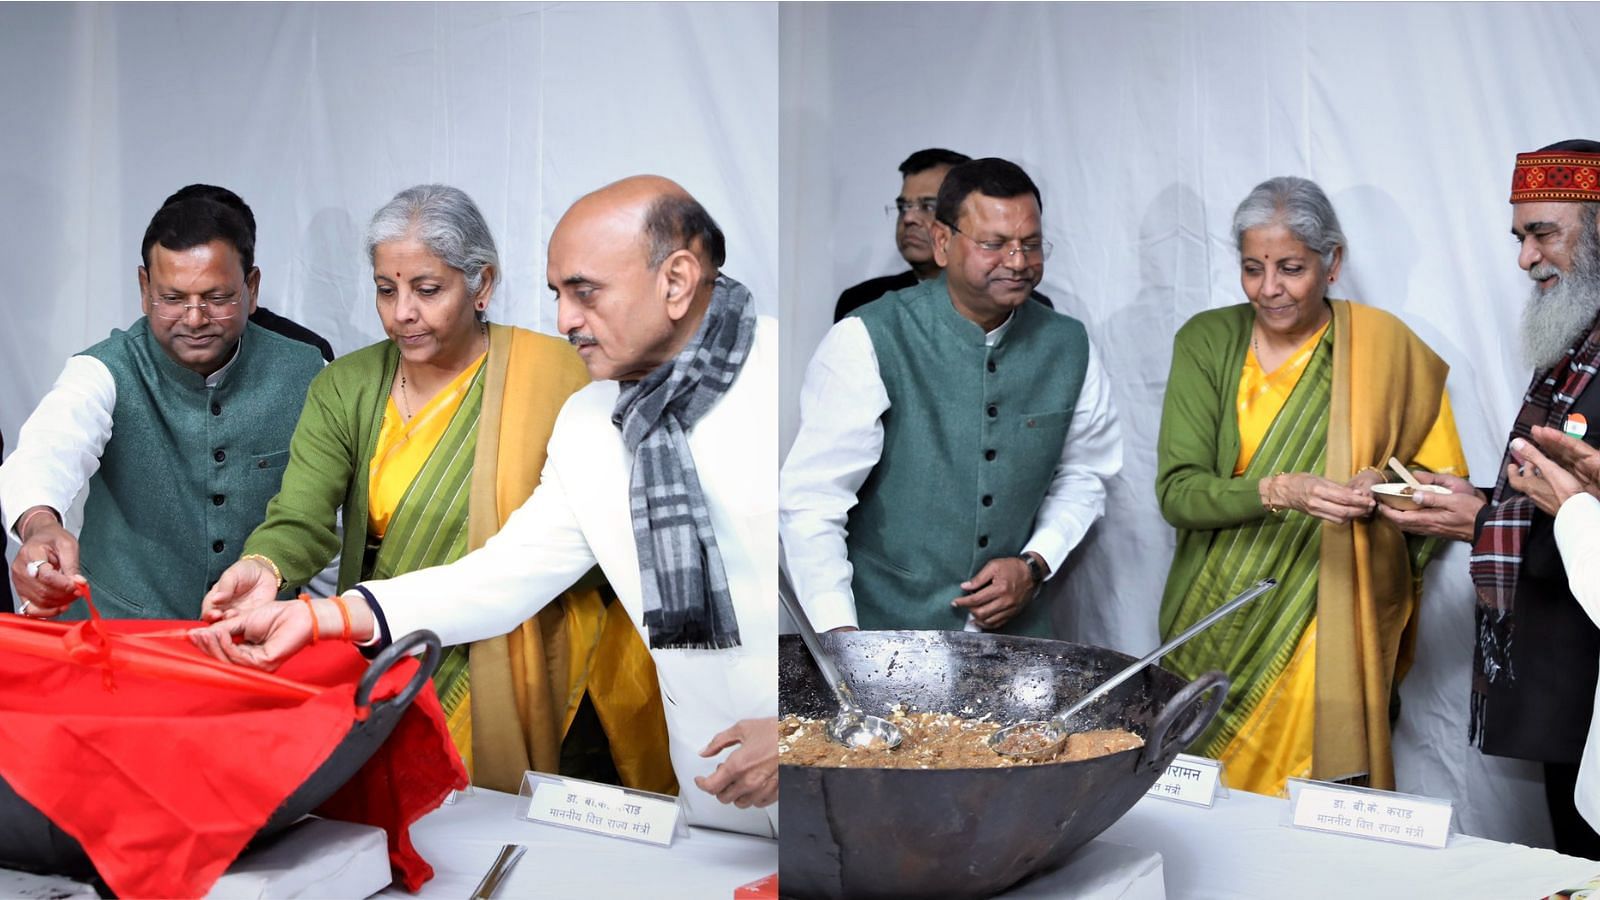 <div class="paragraphs"><p>Union Finance Minister Nirmala Sitharaman partakes in the Halwa Ceremony at the Finance Ministry headquarters in New Delhi on 26 January 2023. The Ceremony marks the final stage of the preparation of the Union Budget.&nbsp;&nbsp;</p></div>